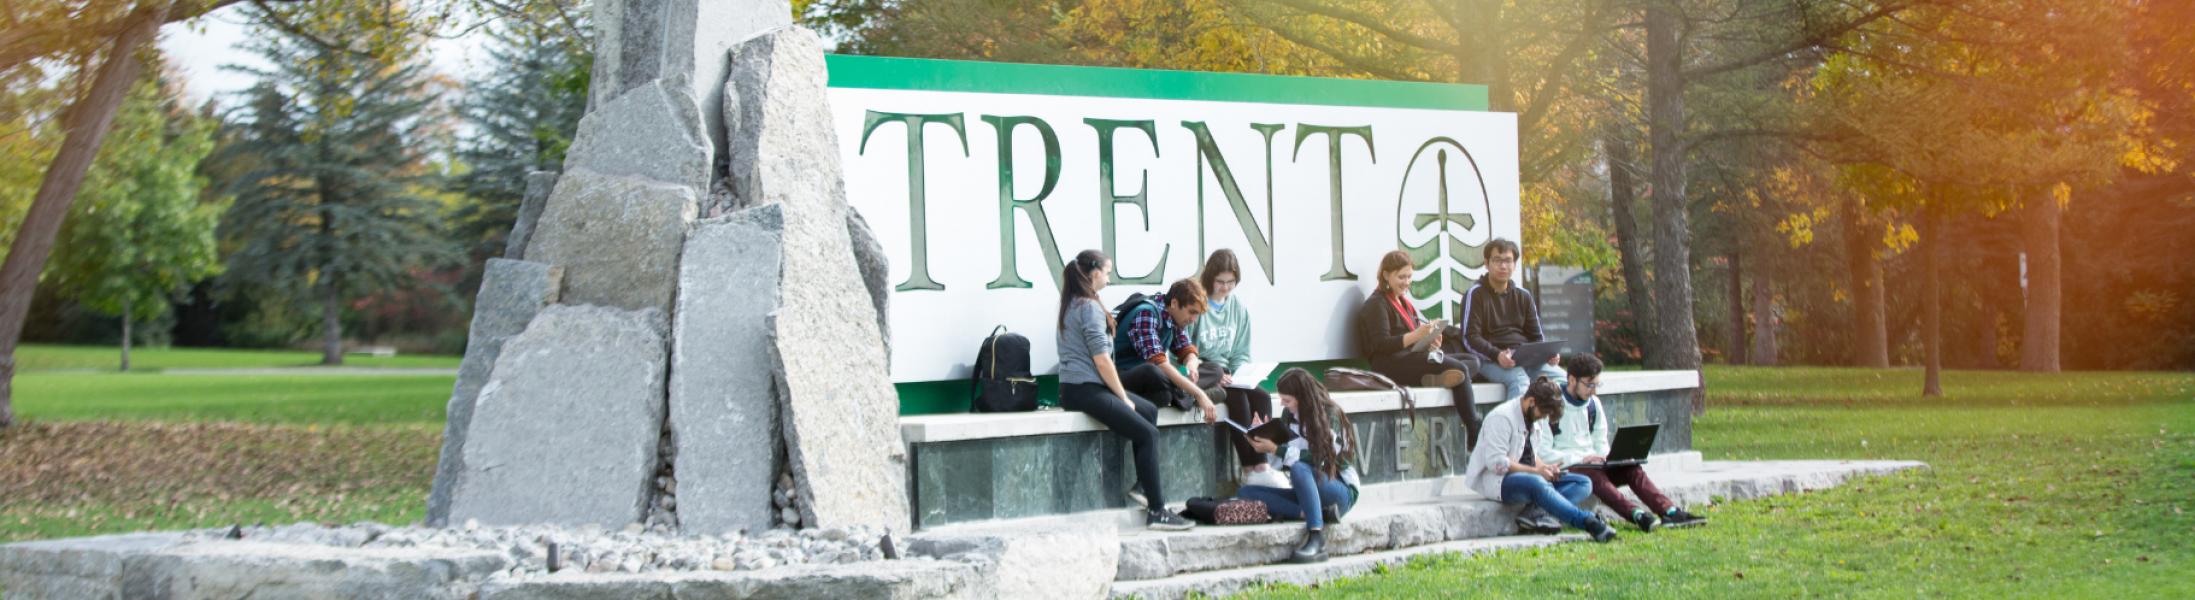 Students Sitting on the Trent sign at the entrance to Symons West Bank campus